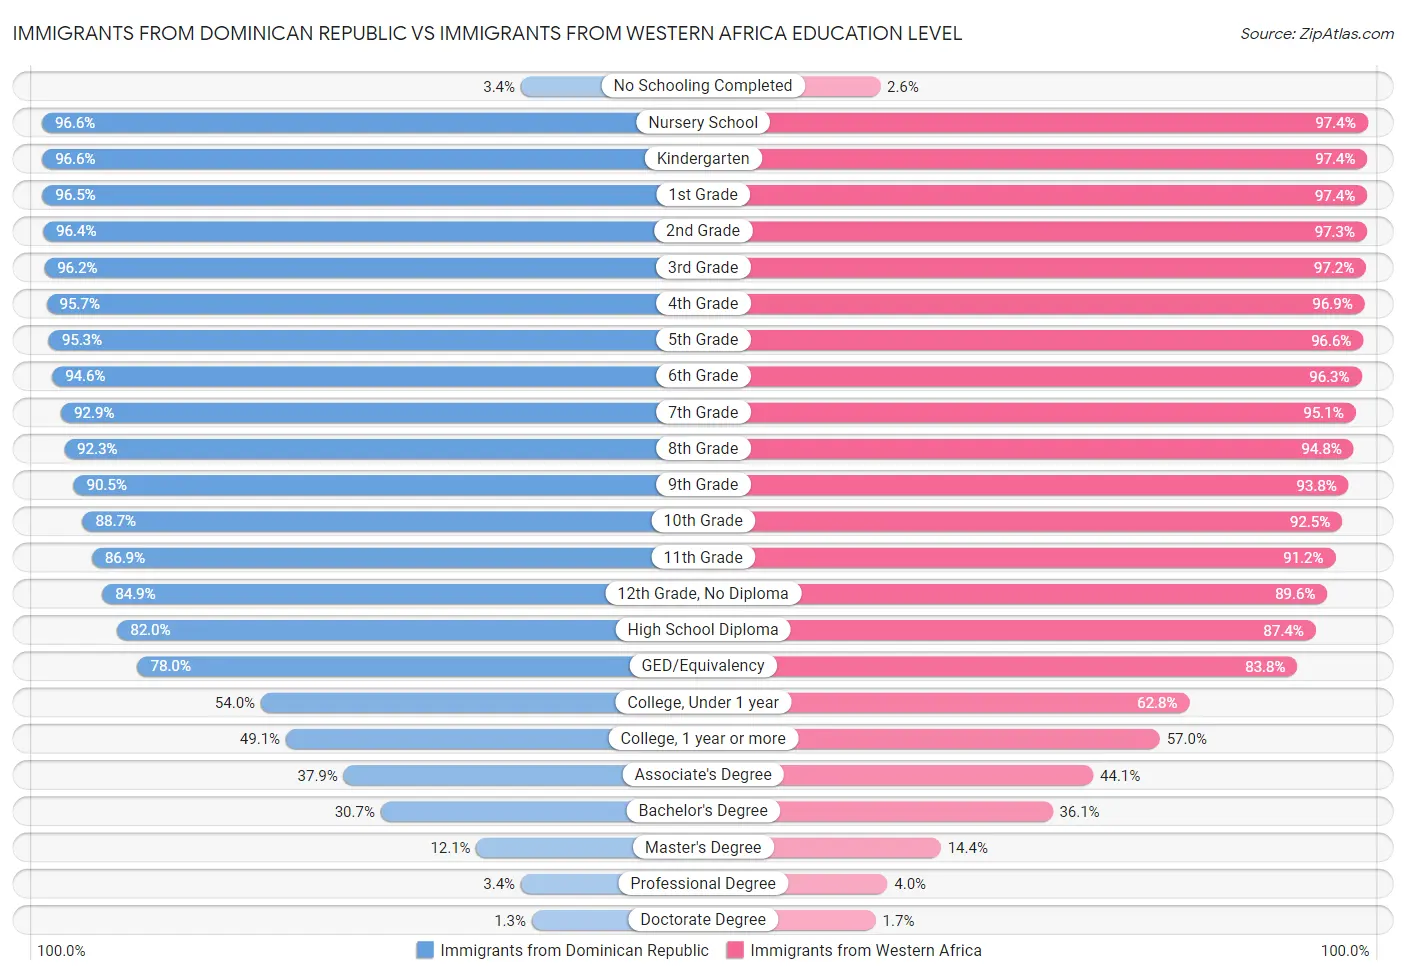 Immigrants from Dominican Republic vs Immigrants from Western Africa Education Level